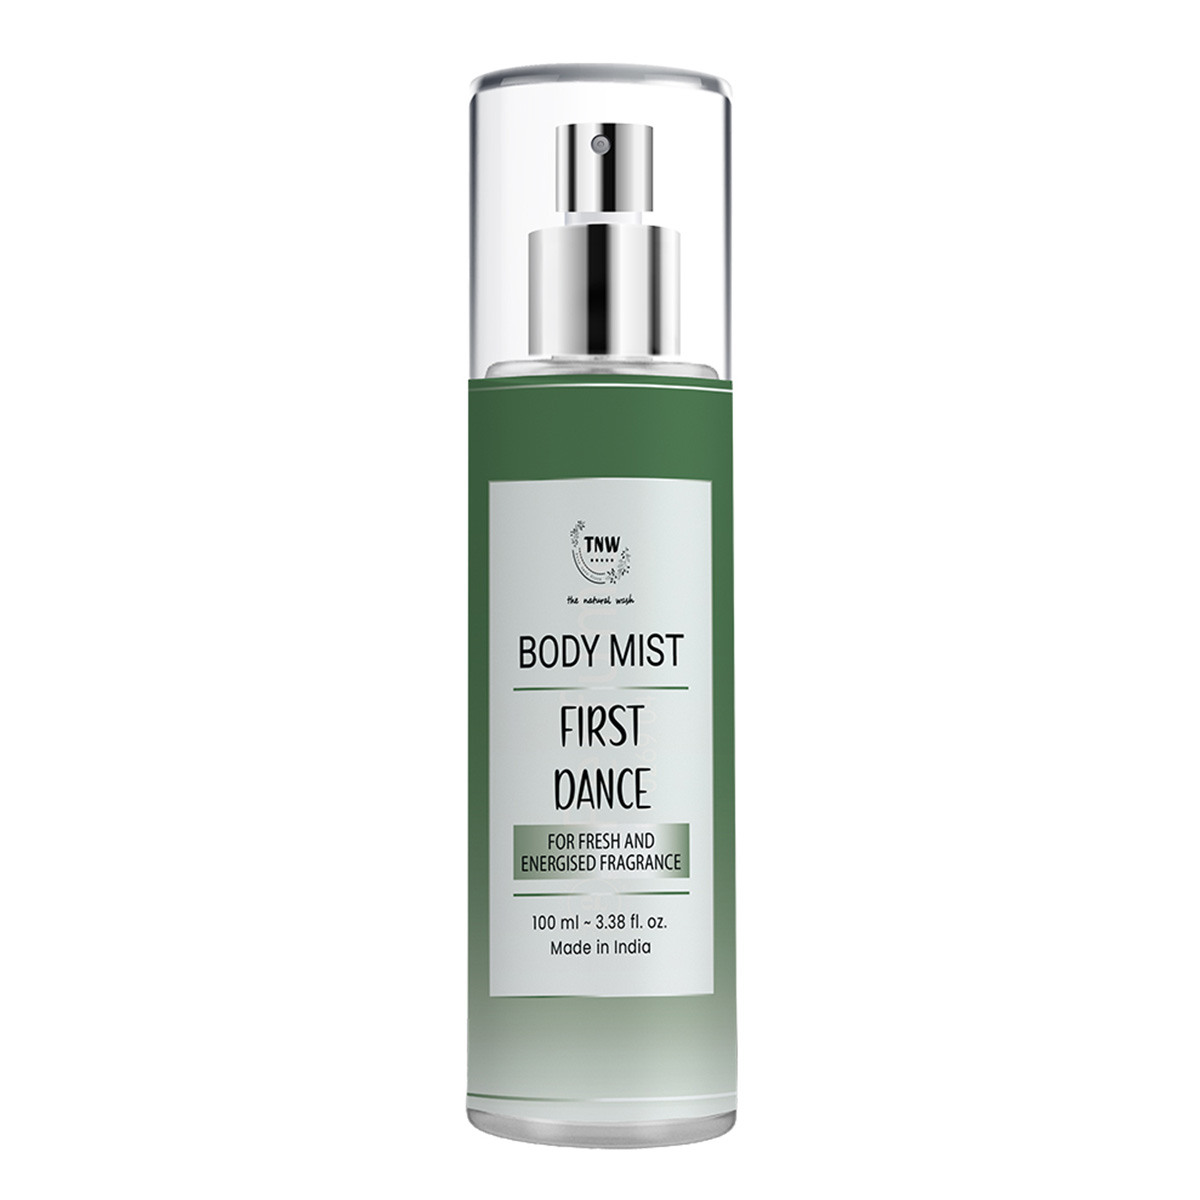 TNW - The Natural Wash First Dance Body Mist For Fresh And Energized Fragrance, 100ml